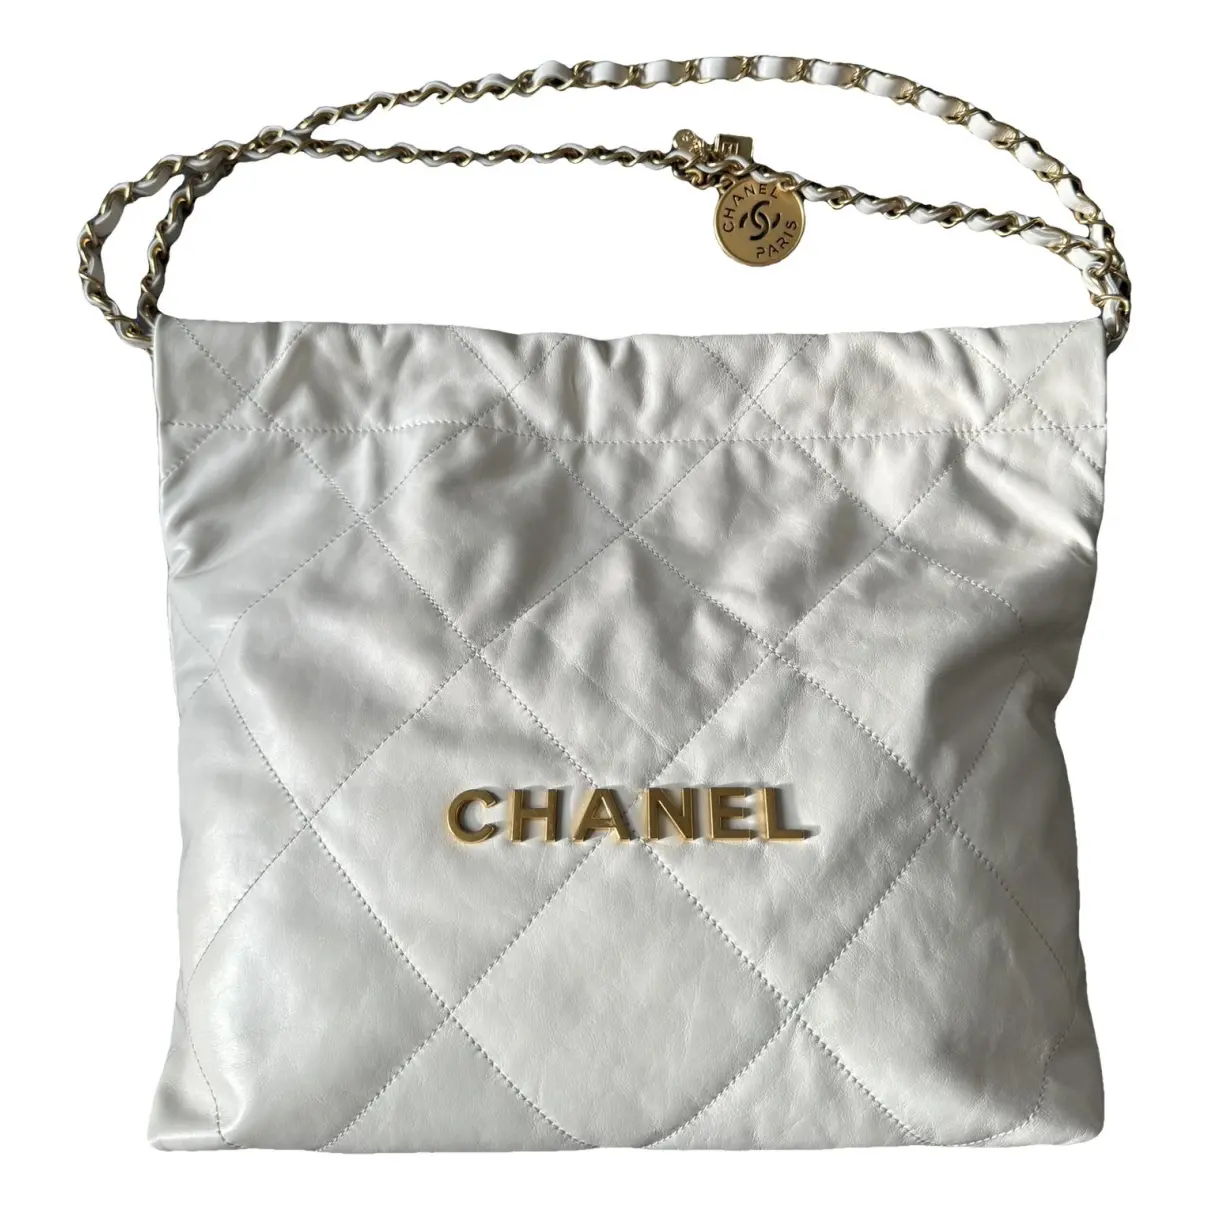 Chanel 22 leather tote Chanel